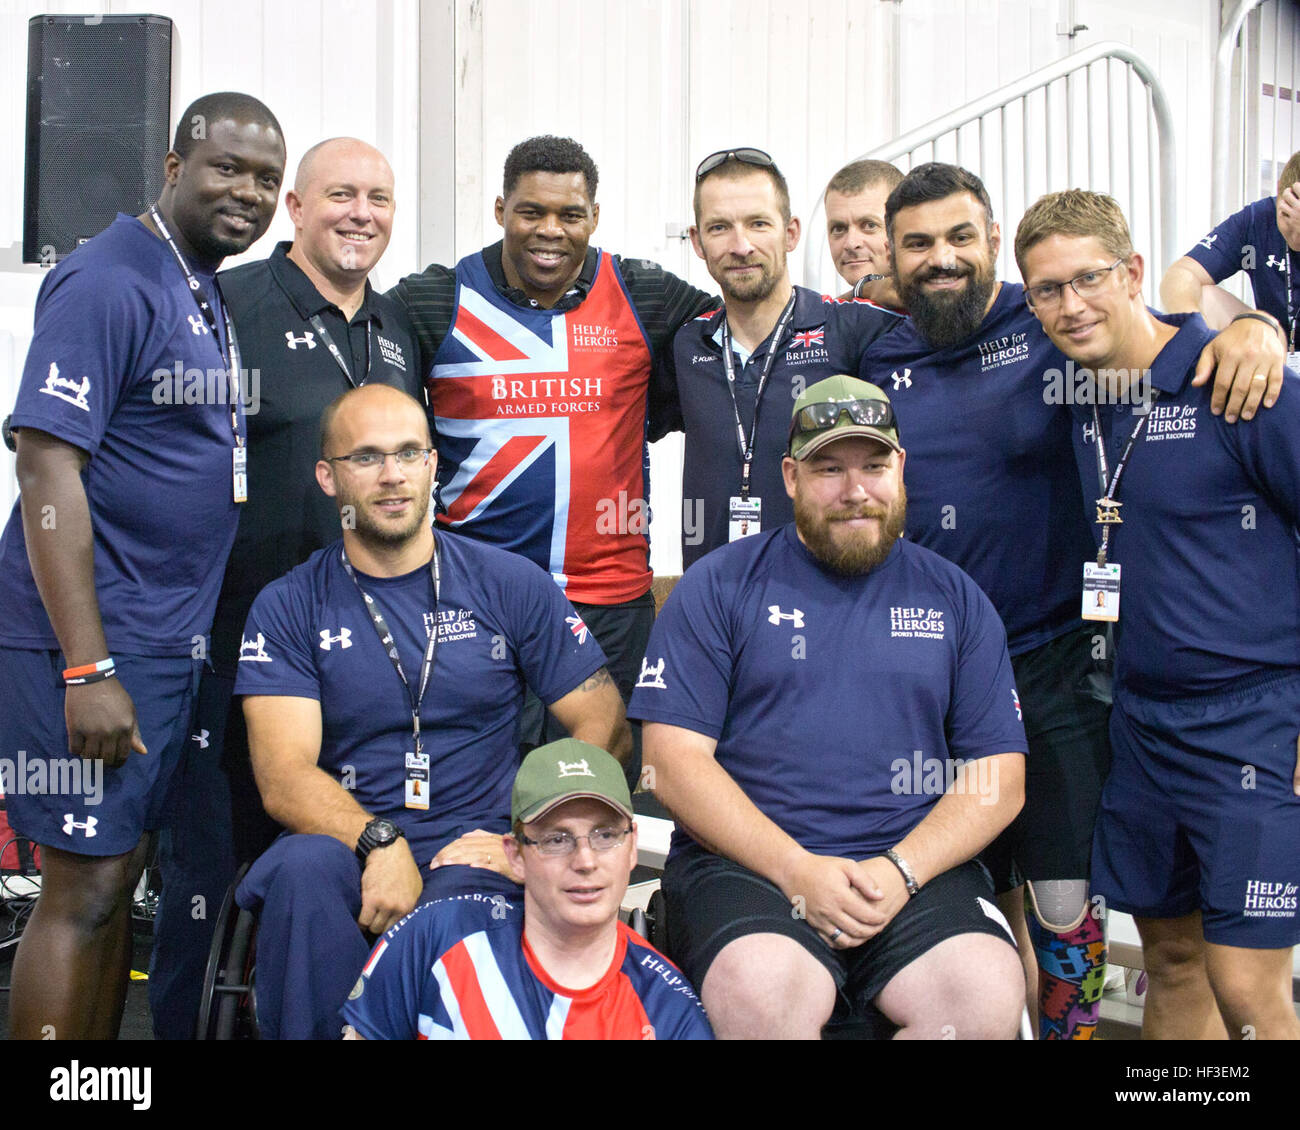 Retired professional football player and 1982 Heisman Trophy winner Herschel Walker takes his place amongst newfound friends from the United Kingdom, Team British Armed Forces. Walker visited with competitors during the 2015 DoD Warrior Games on Marine Corps Base Quantico. Walker has journeyed to each Warrior Games since its inception and has no intention of stopping. “These are true athletes,” Walker said. “Watching their determination is an inspiration to me.” (U.S. Army photo by AW2 Staff Sgt. Tracy J. Smith) Team Army set sights on gold for Day 5 of the 2015 Warrior Games 150626-Z-PA893-00 Stock Photo